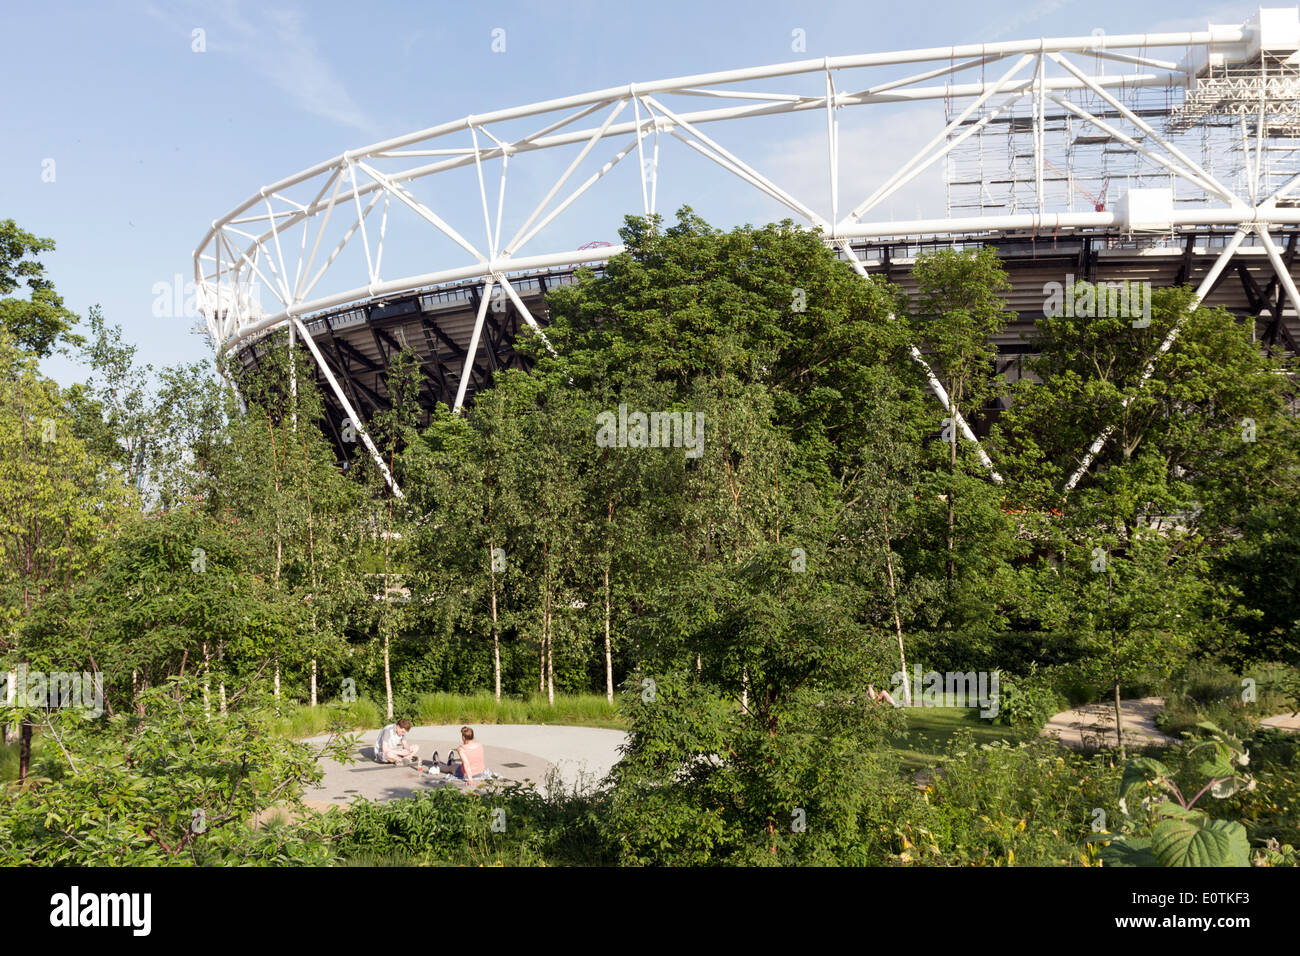 The Queen Elizabeth Olympic Park - Stratford - London Stock Photo